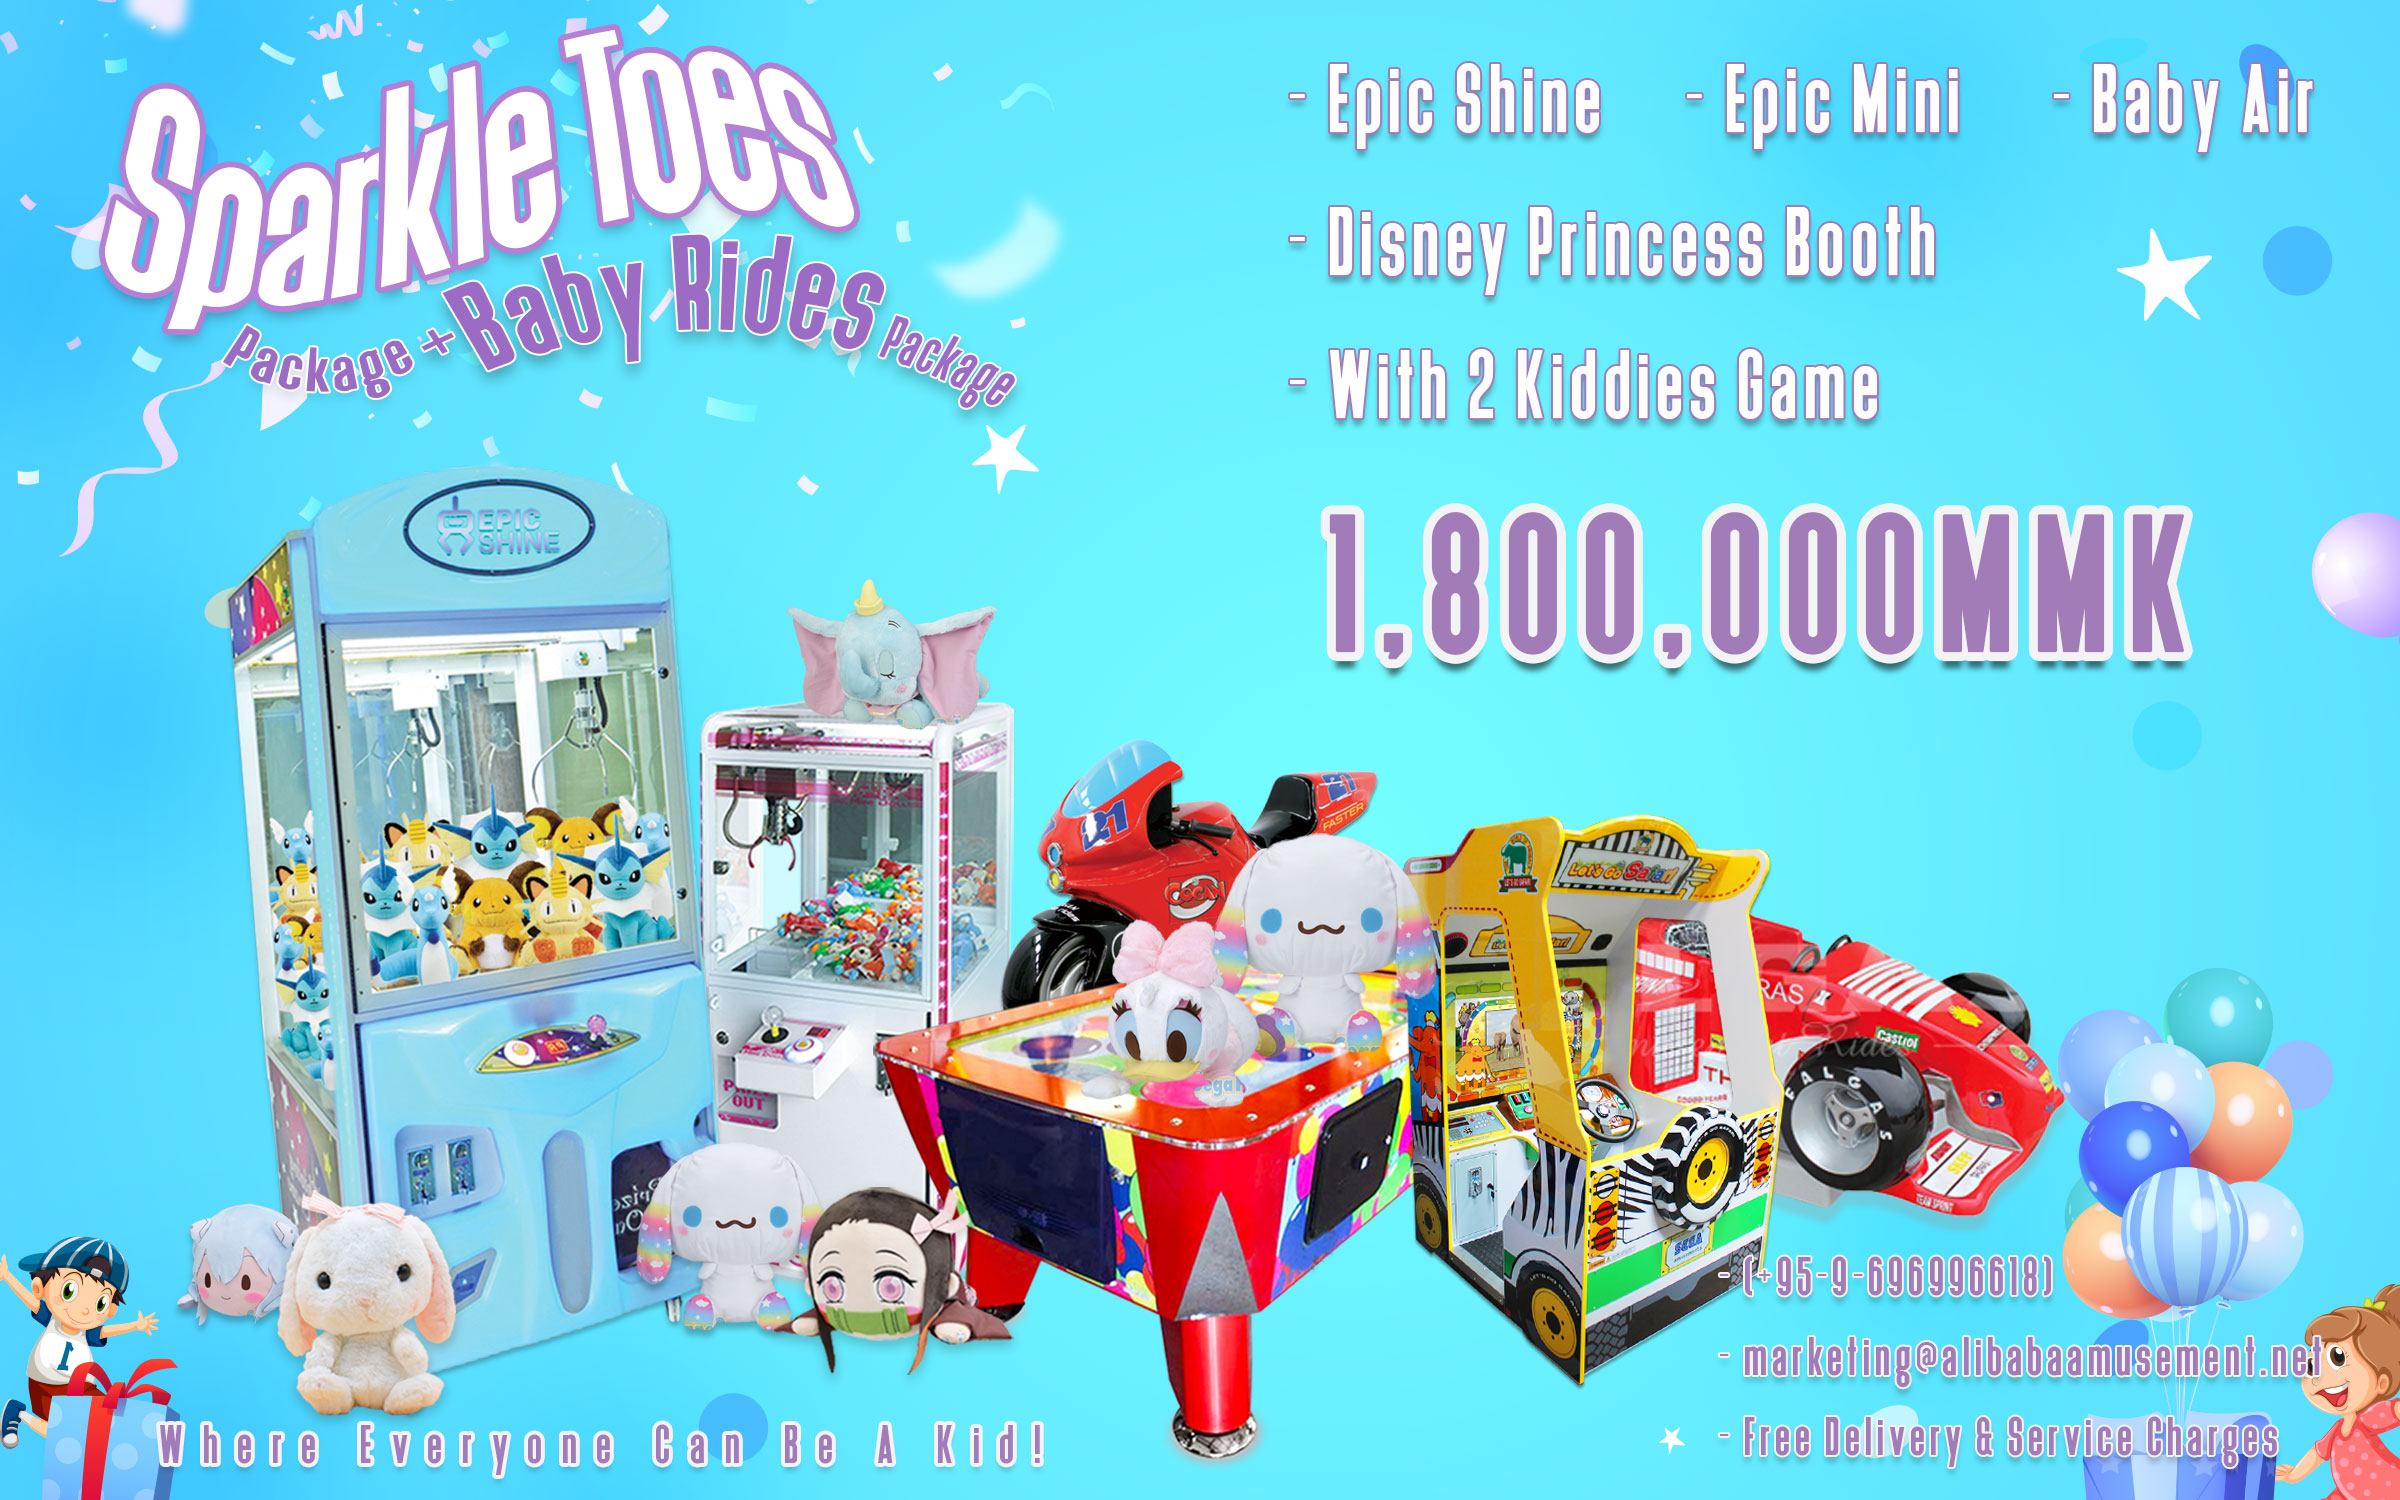 Sparkle Toes Baby Rides Package